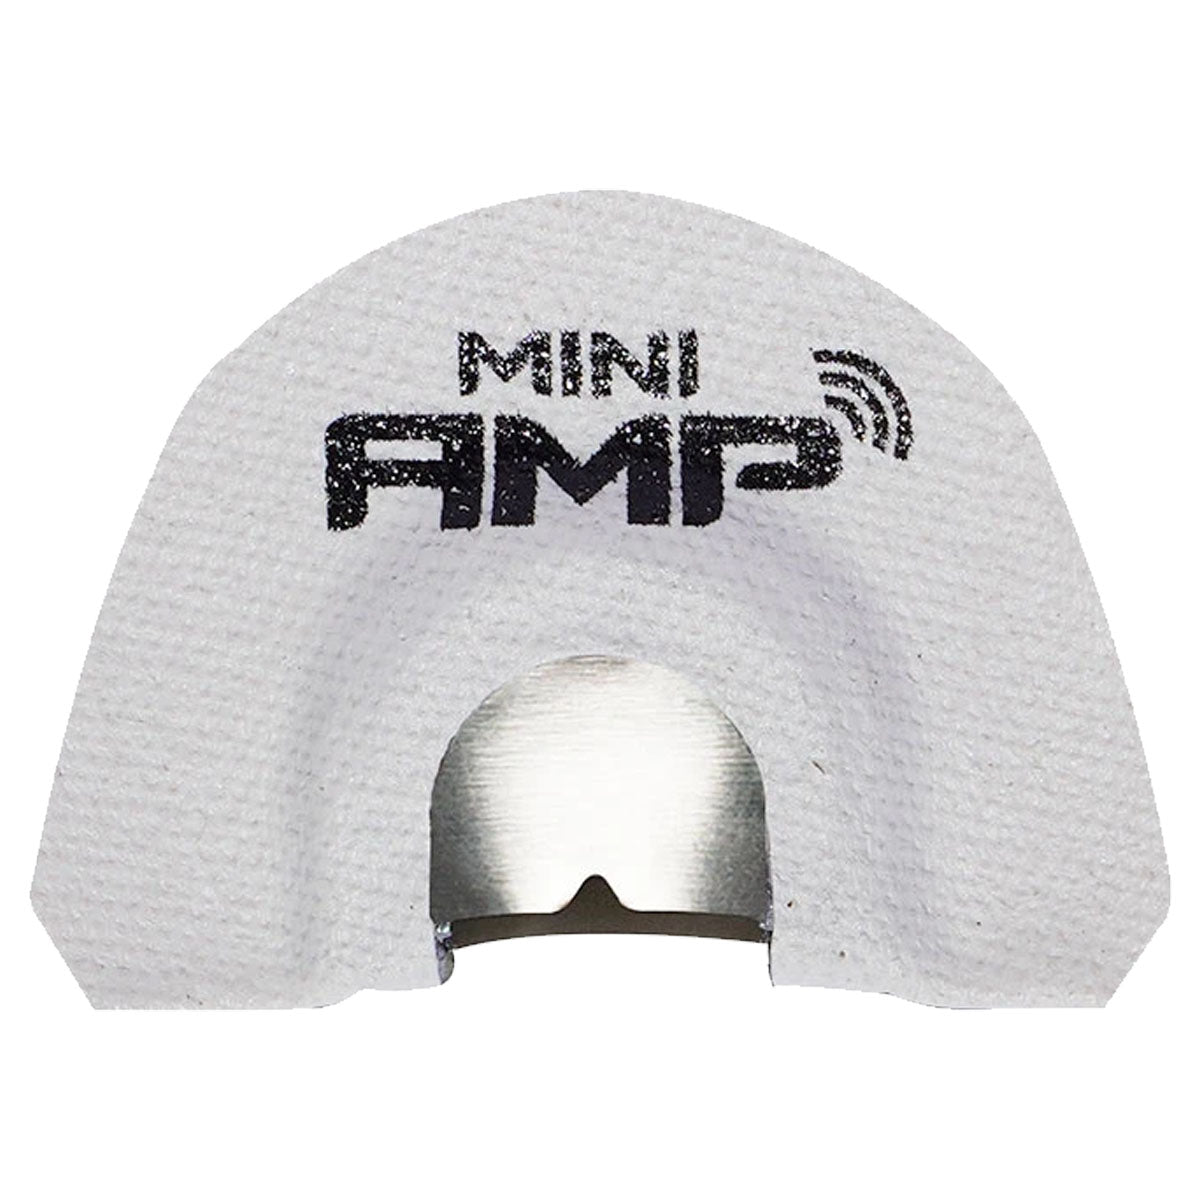 Phelps White Mini-AMP in  by GOHUNT | Phelps Game Calls - GOHUNT Shop